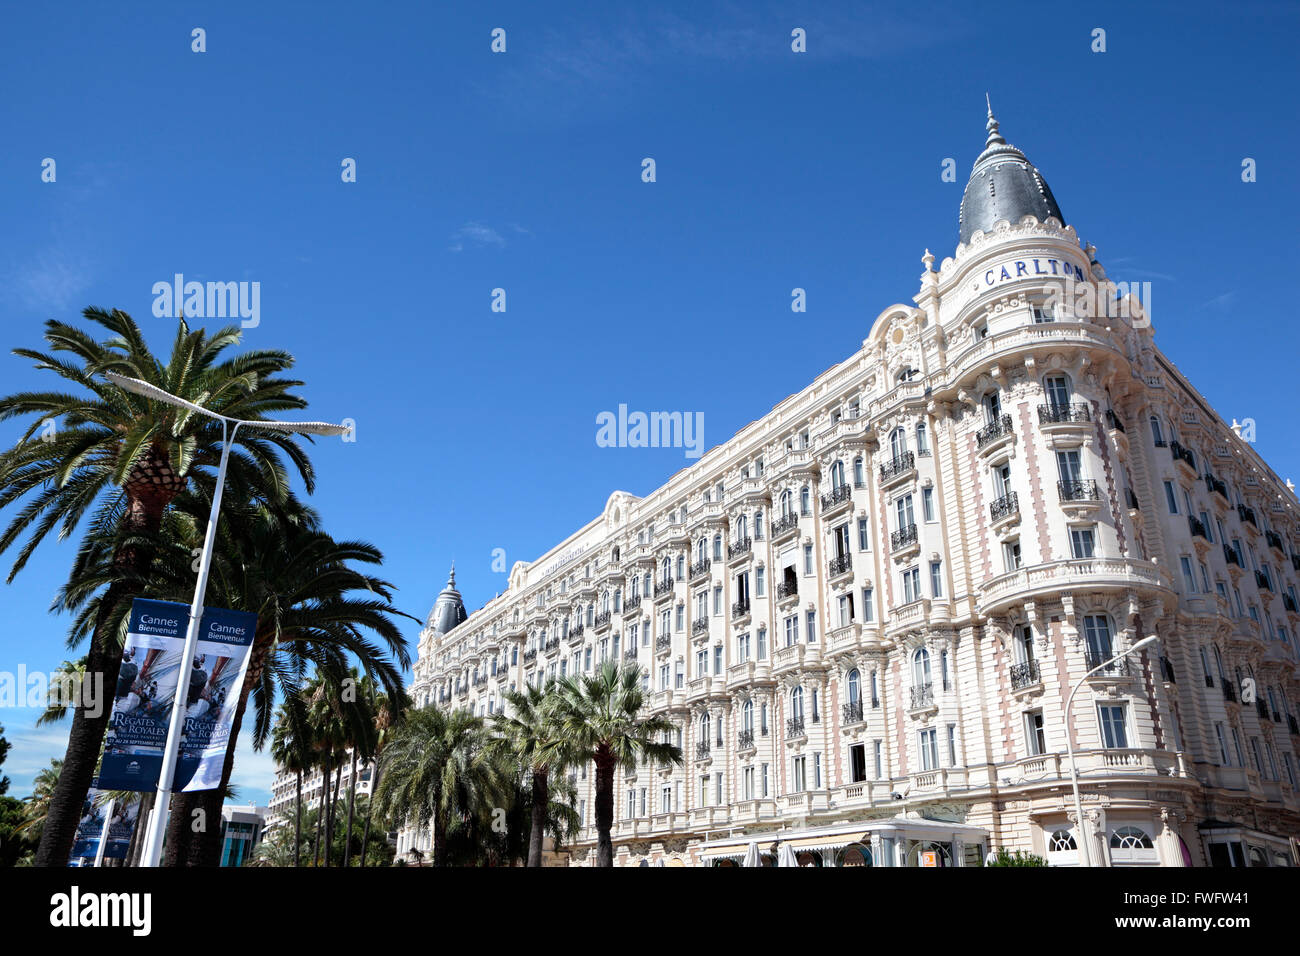 Wideangle view of the facade and dome of the famous Carlton International Hotel situated on the croisette boulevard in Cannes Stock Photo